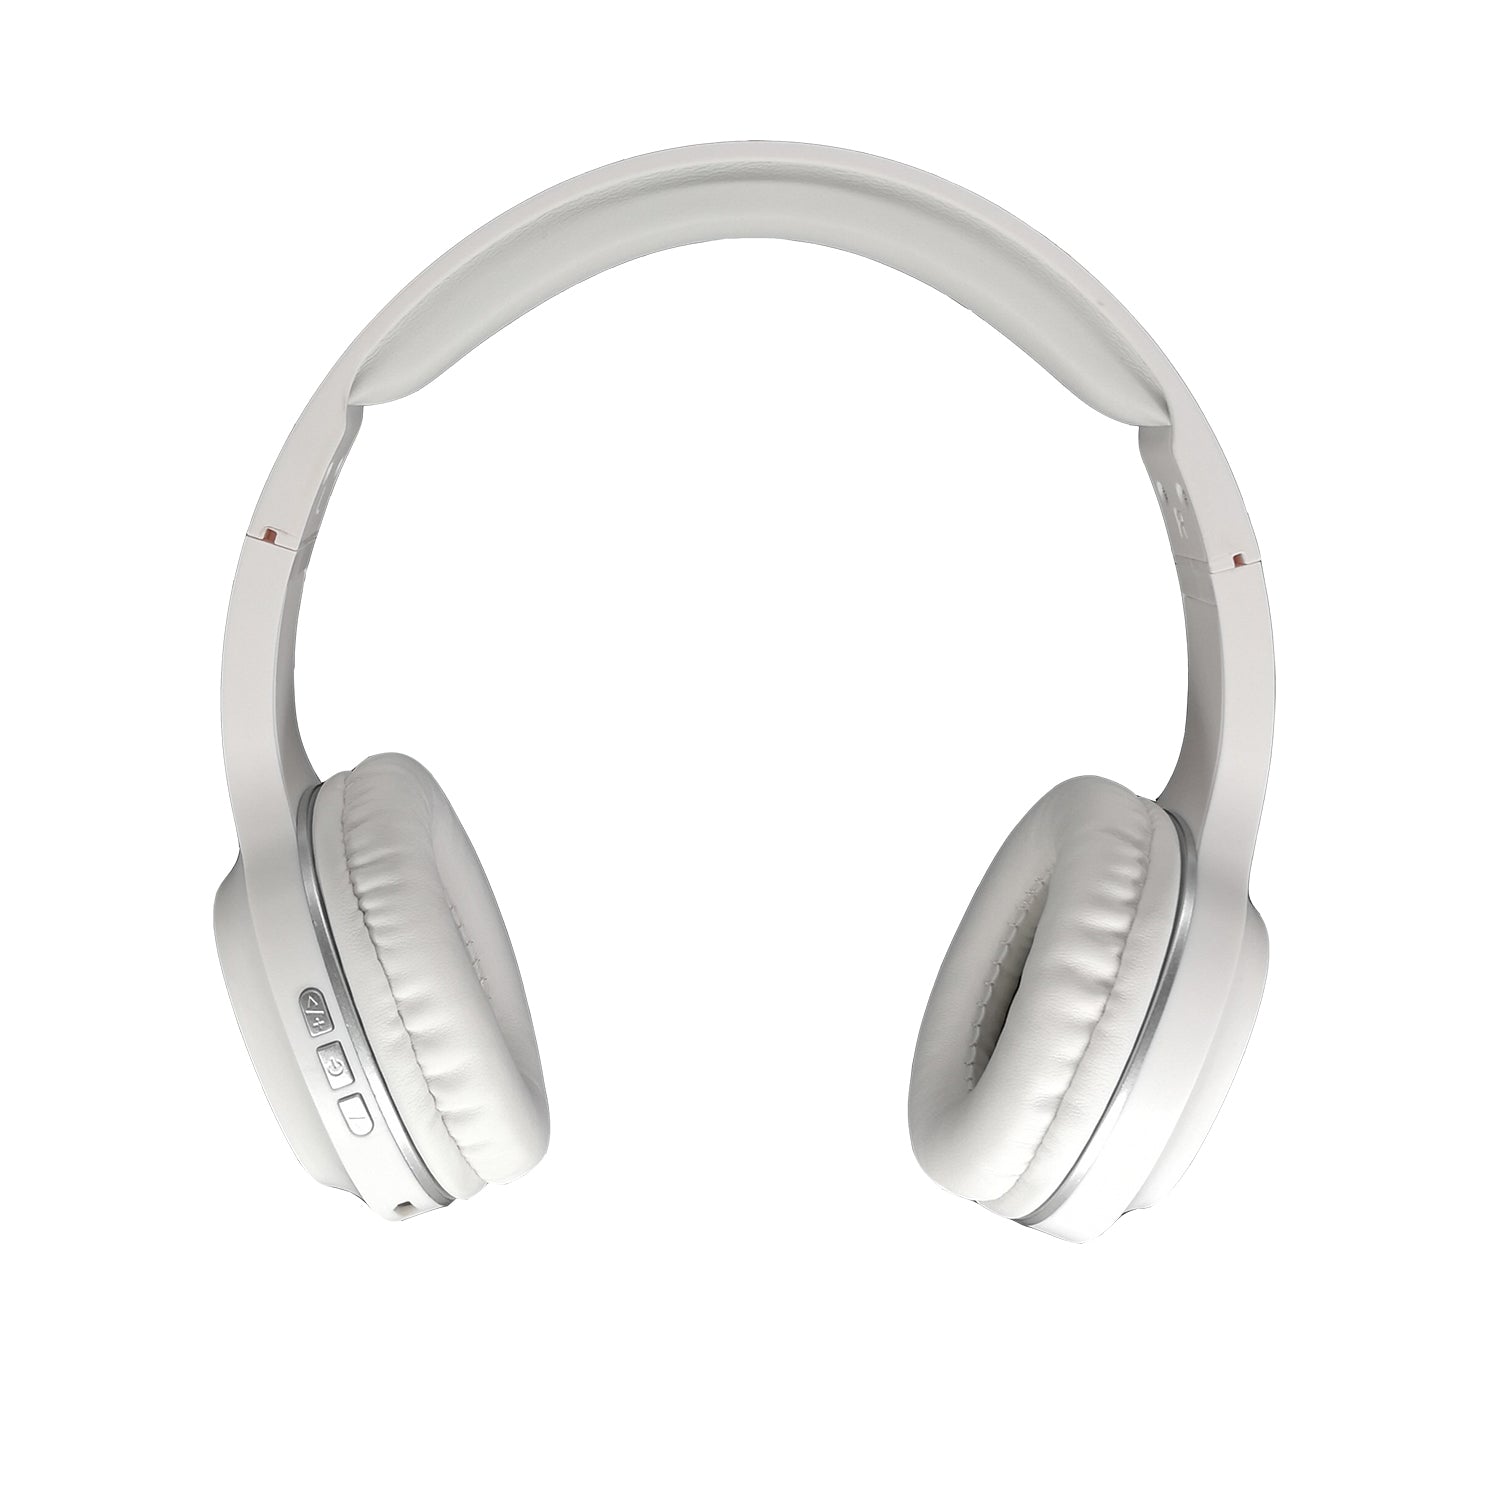 Photo of Morpheus 360 Tremors Wireless on-ear Headphones – White with Silver accents, front view displays Power on/off button, Volume up/down, and track forward/backward buttons.